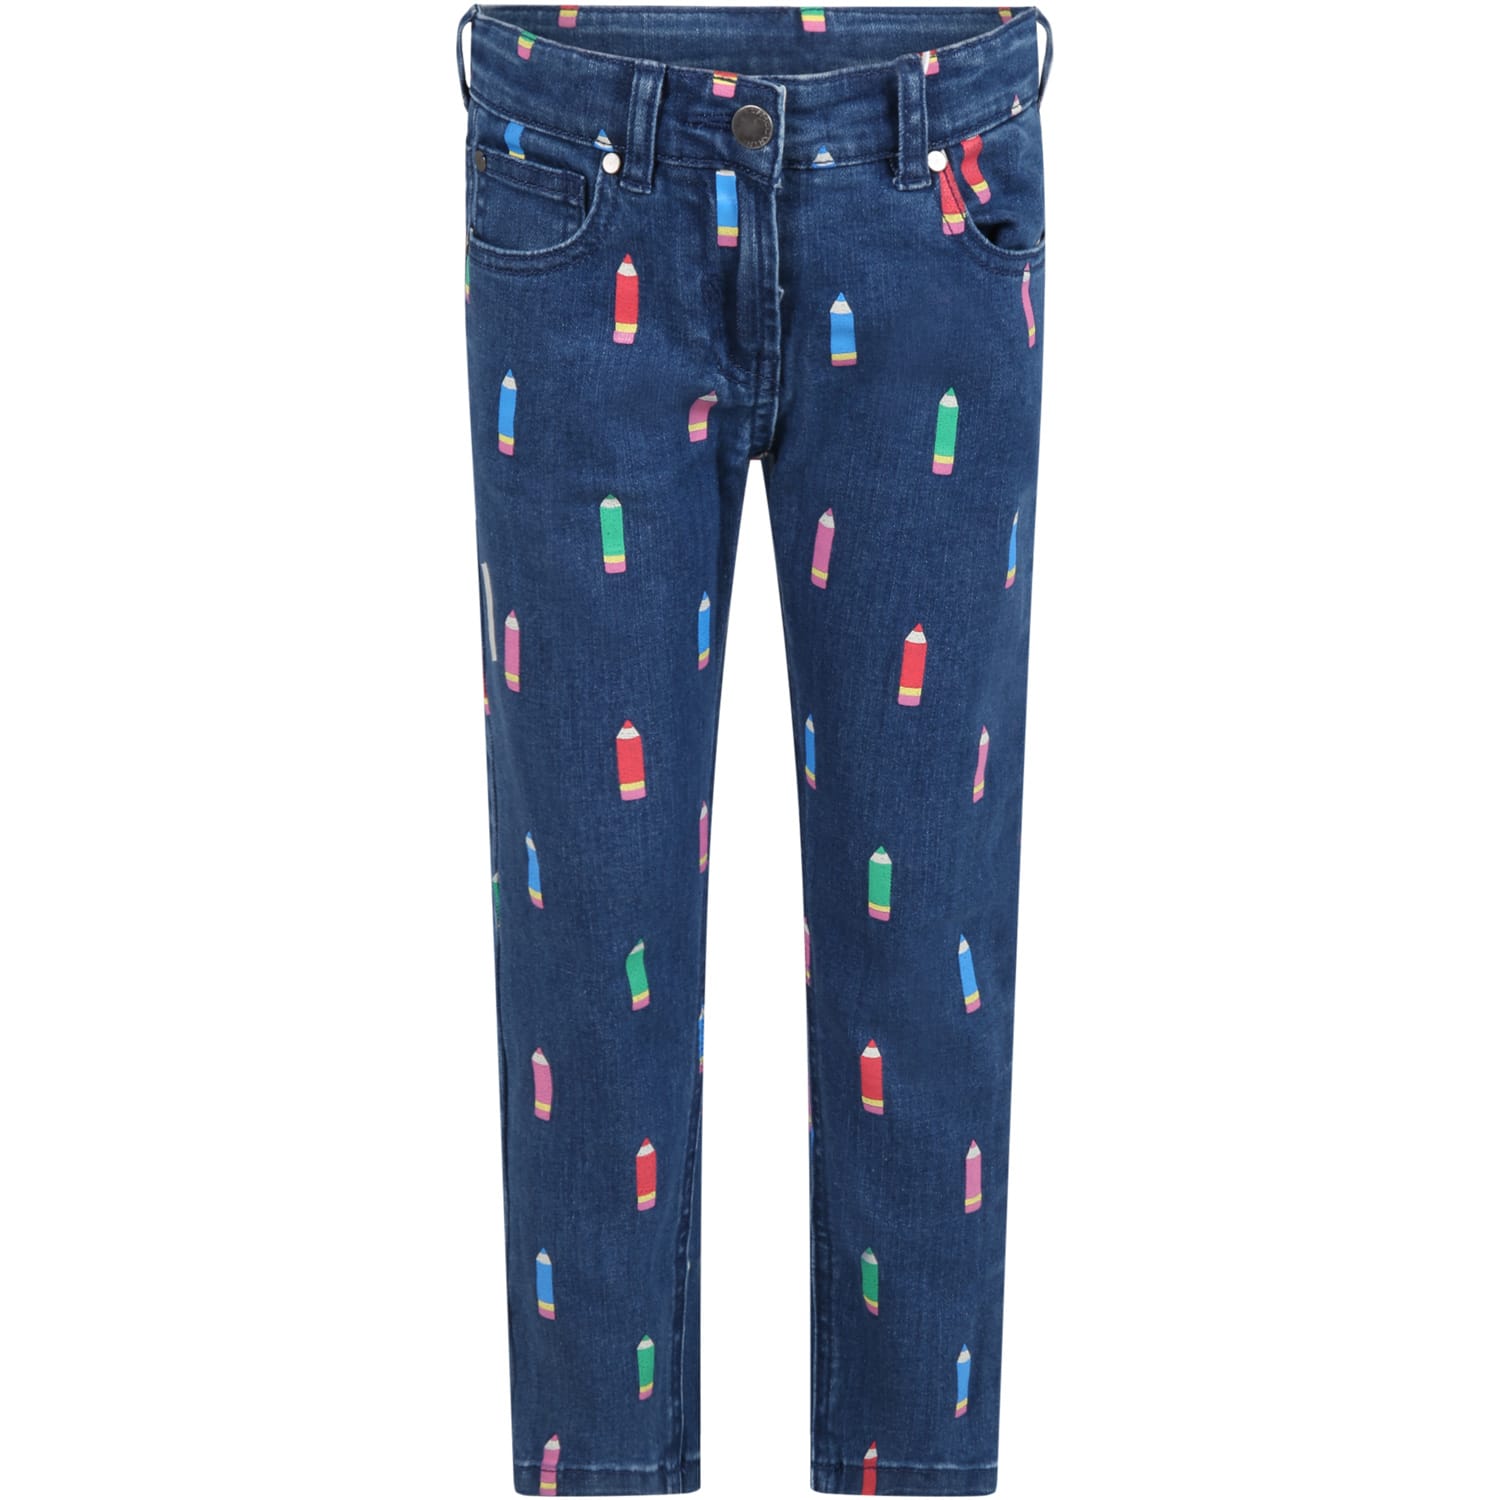 Stella McCartney Kids Blue Jeans Denim For Girl With Colorful Pencils